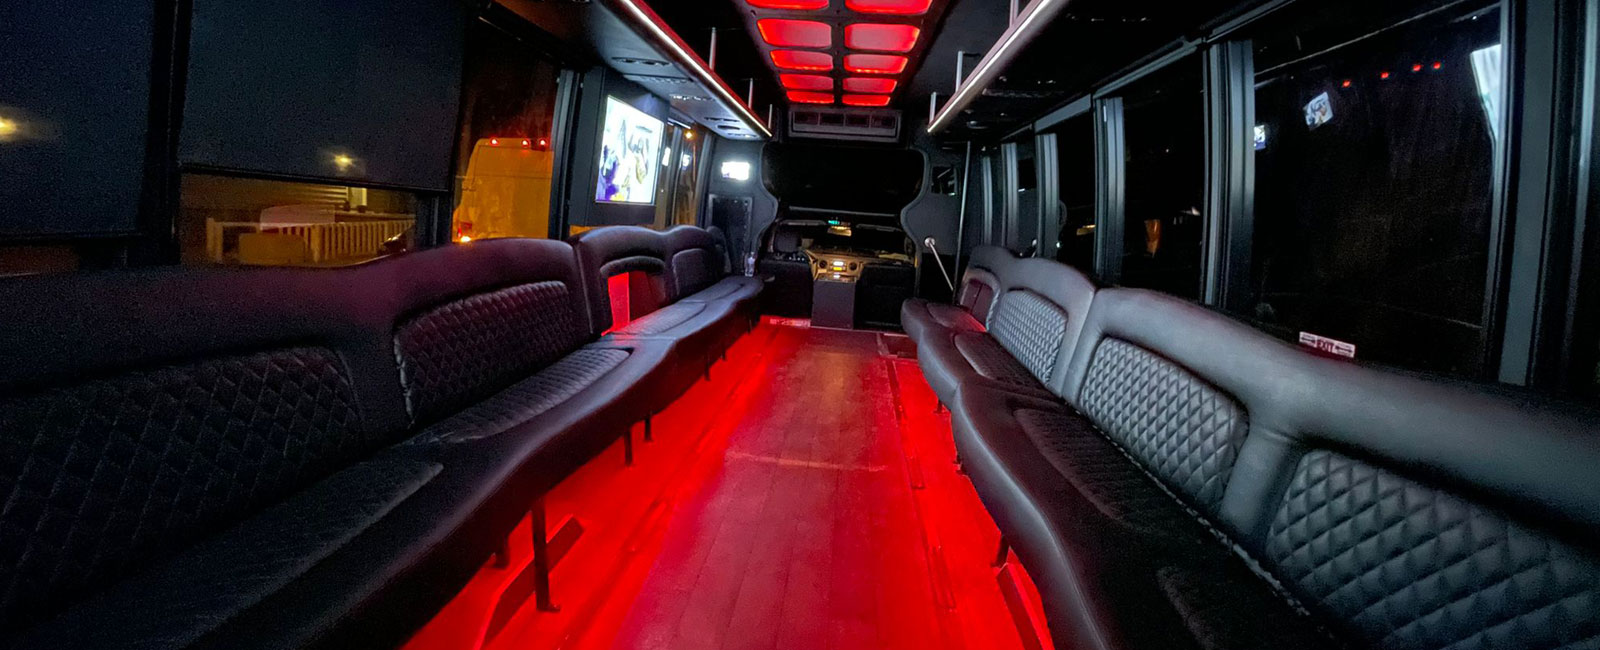 Party Bus LED Lights